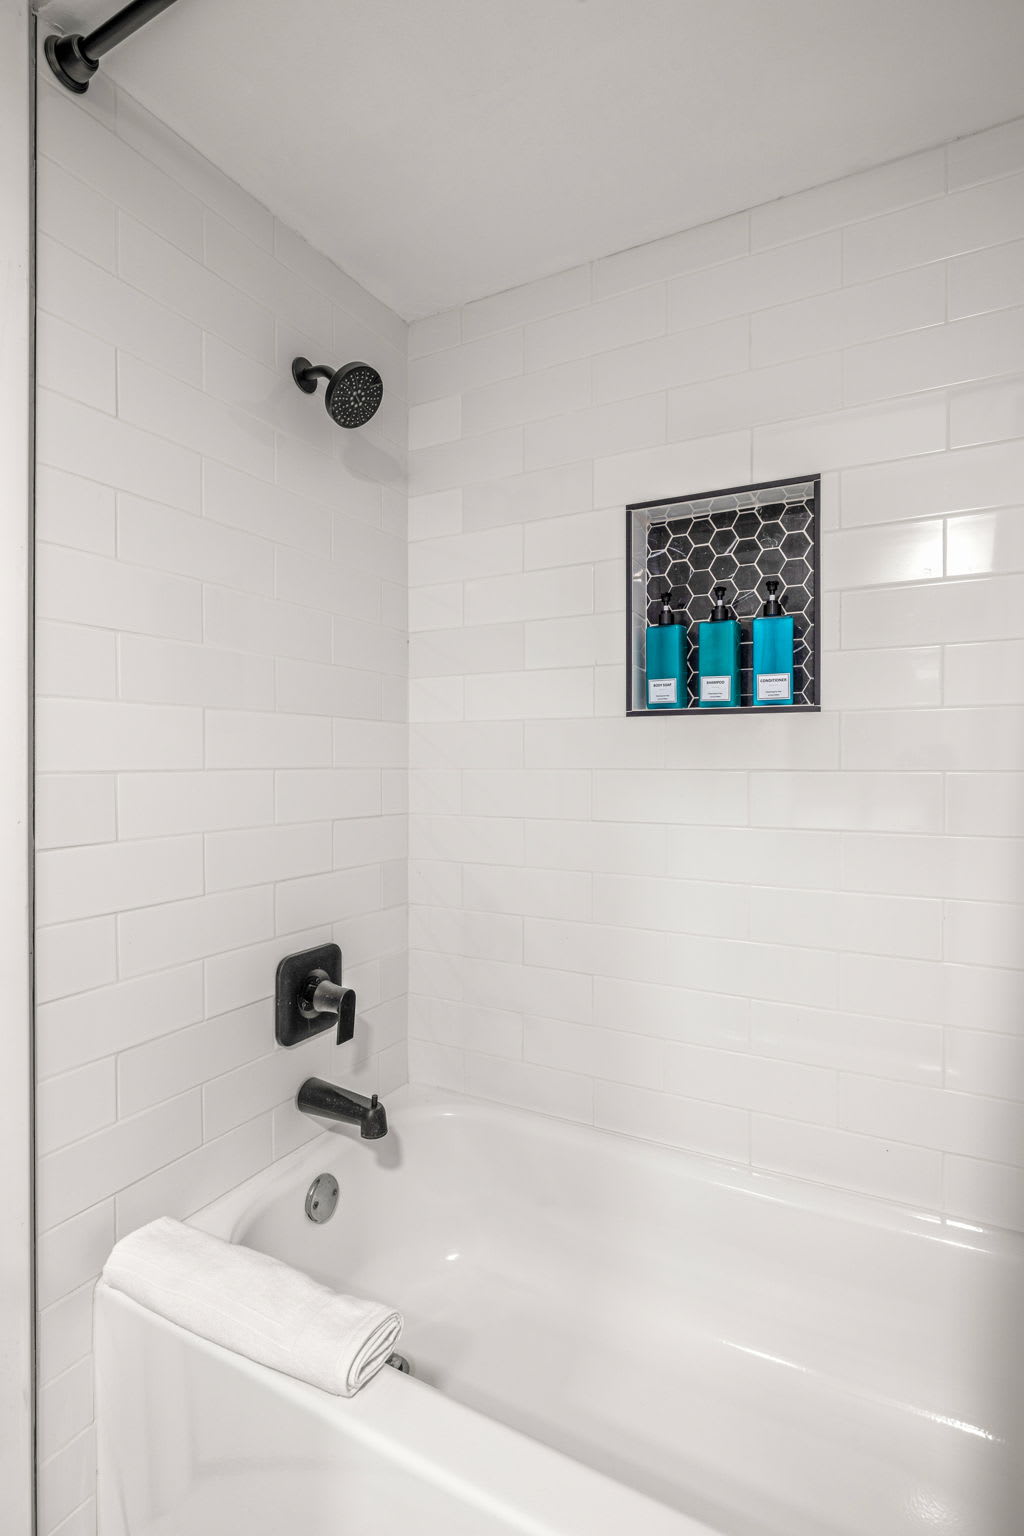 Full bathroom with tub/shower combo